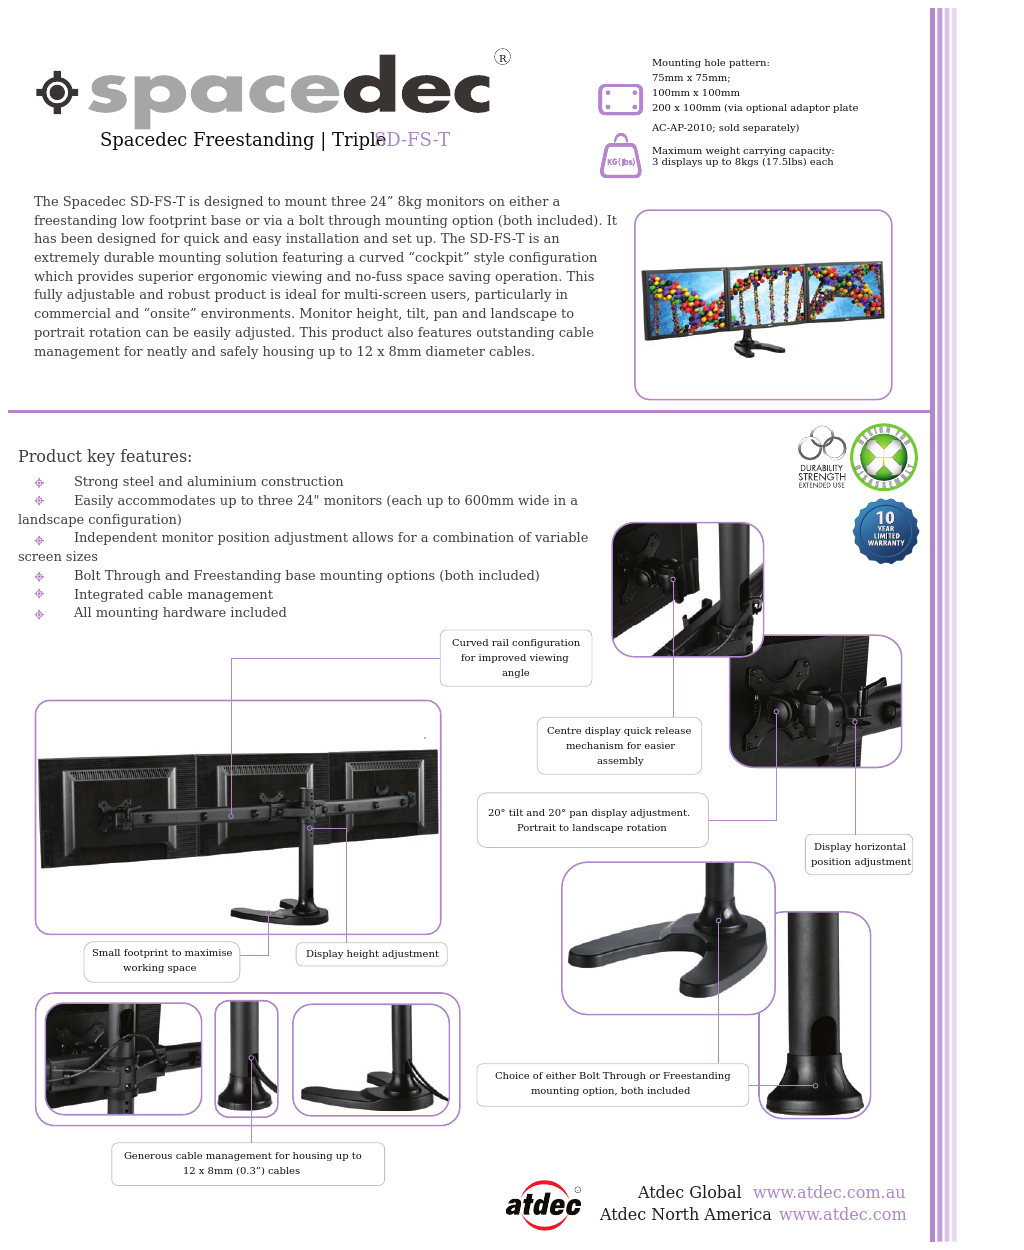 Spacedec SD-FS-T product brochure